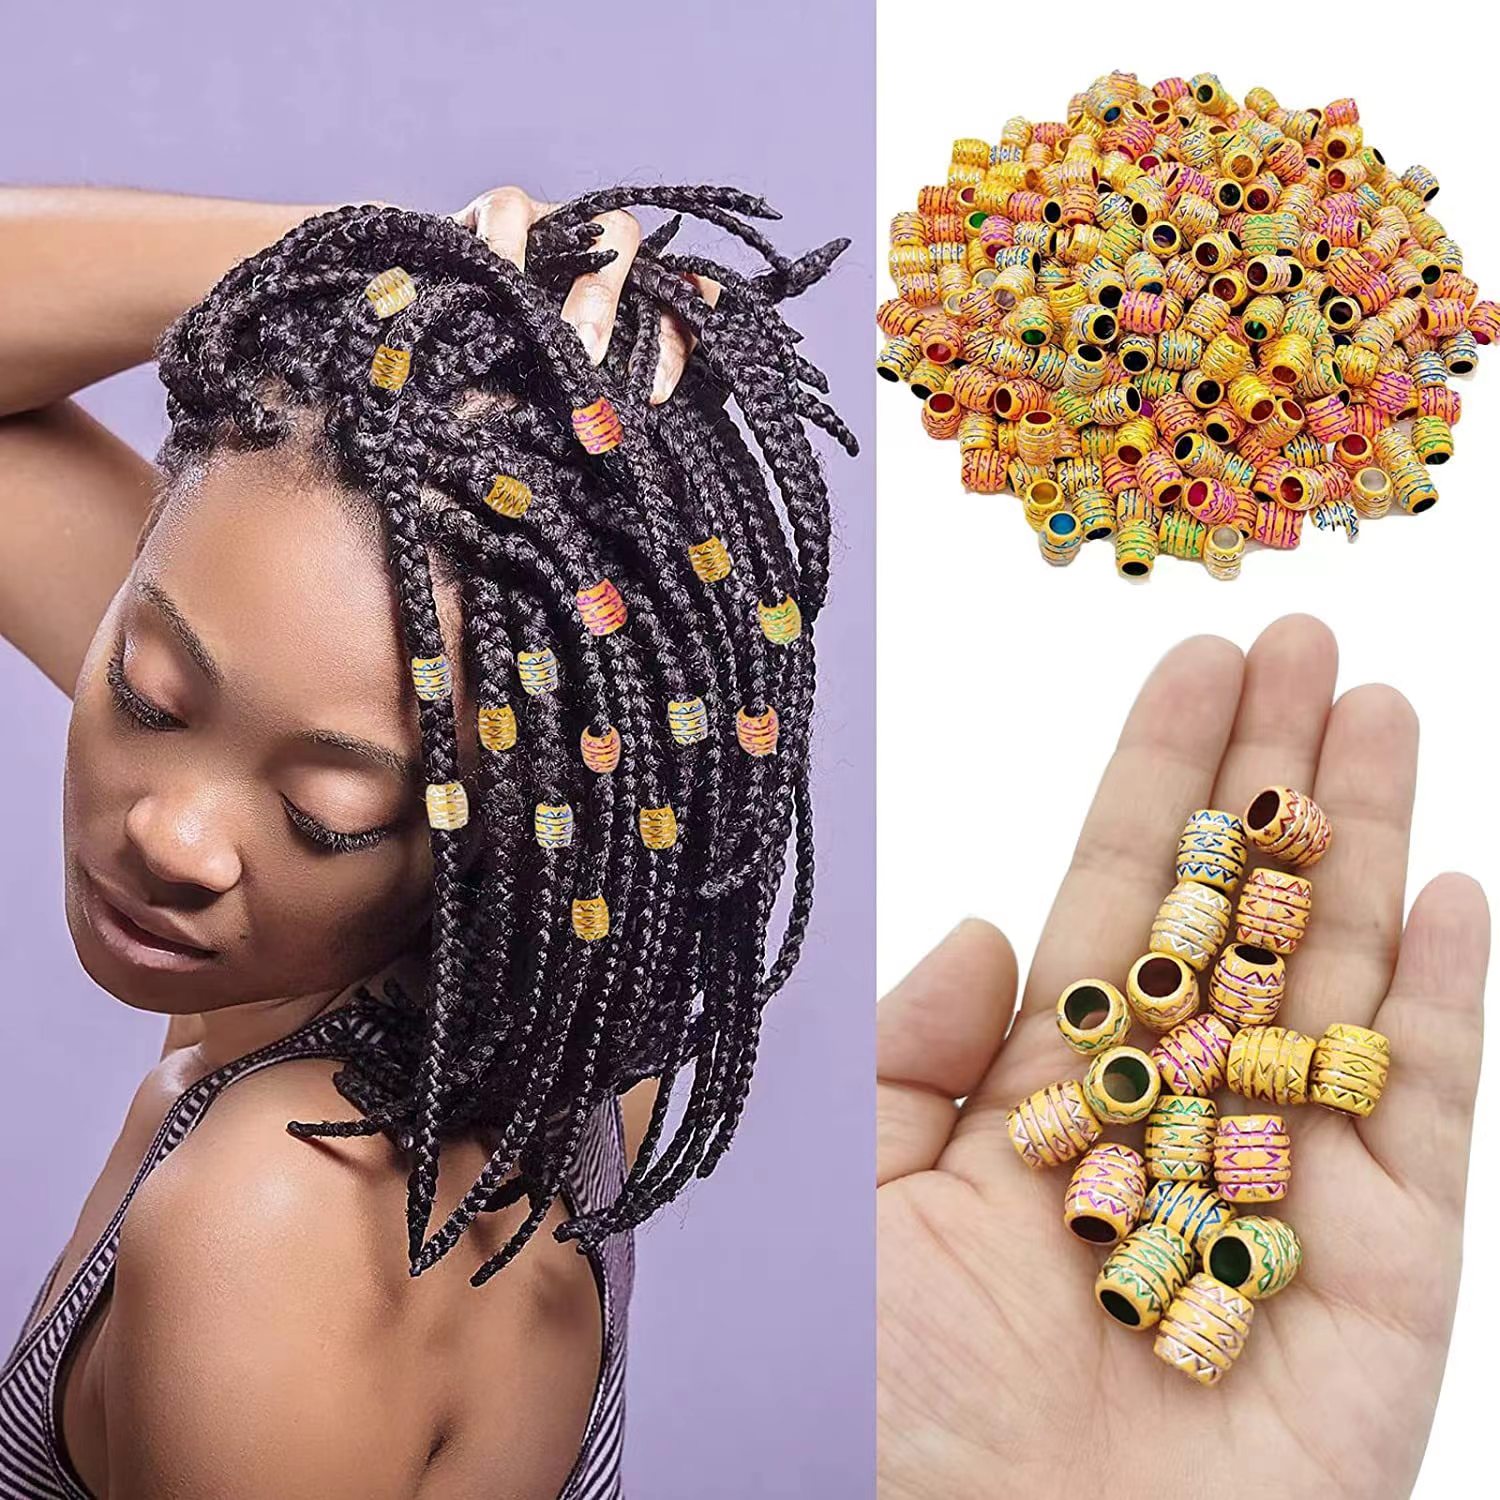 100 Pcs Afrian Wood Beads for Hair Assorted Macrame Beads Wooden Craft  Beads for Hair Braids Natural Painted Wooden Hair Beads for Women Girls  Boys